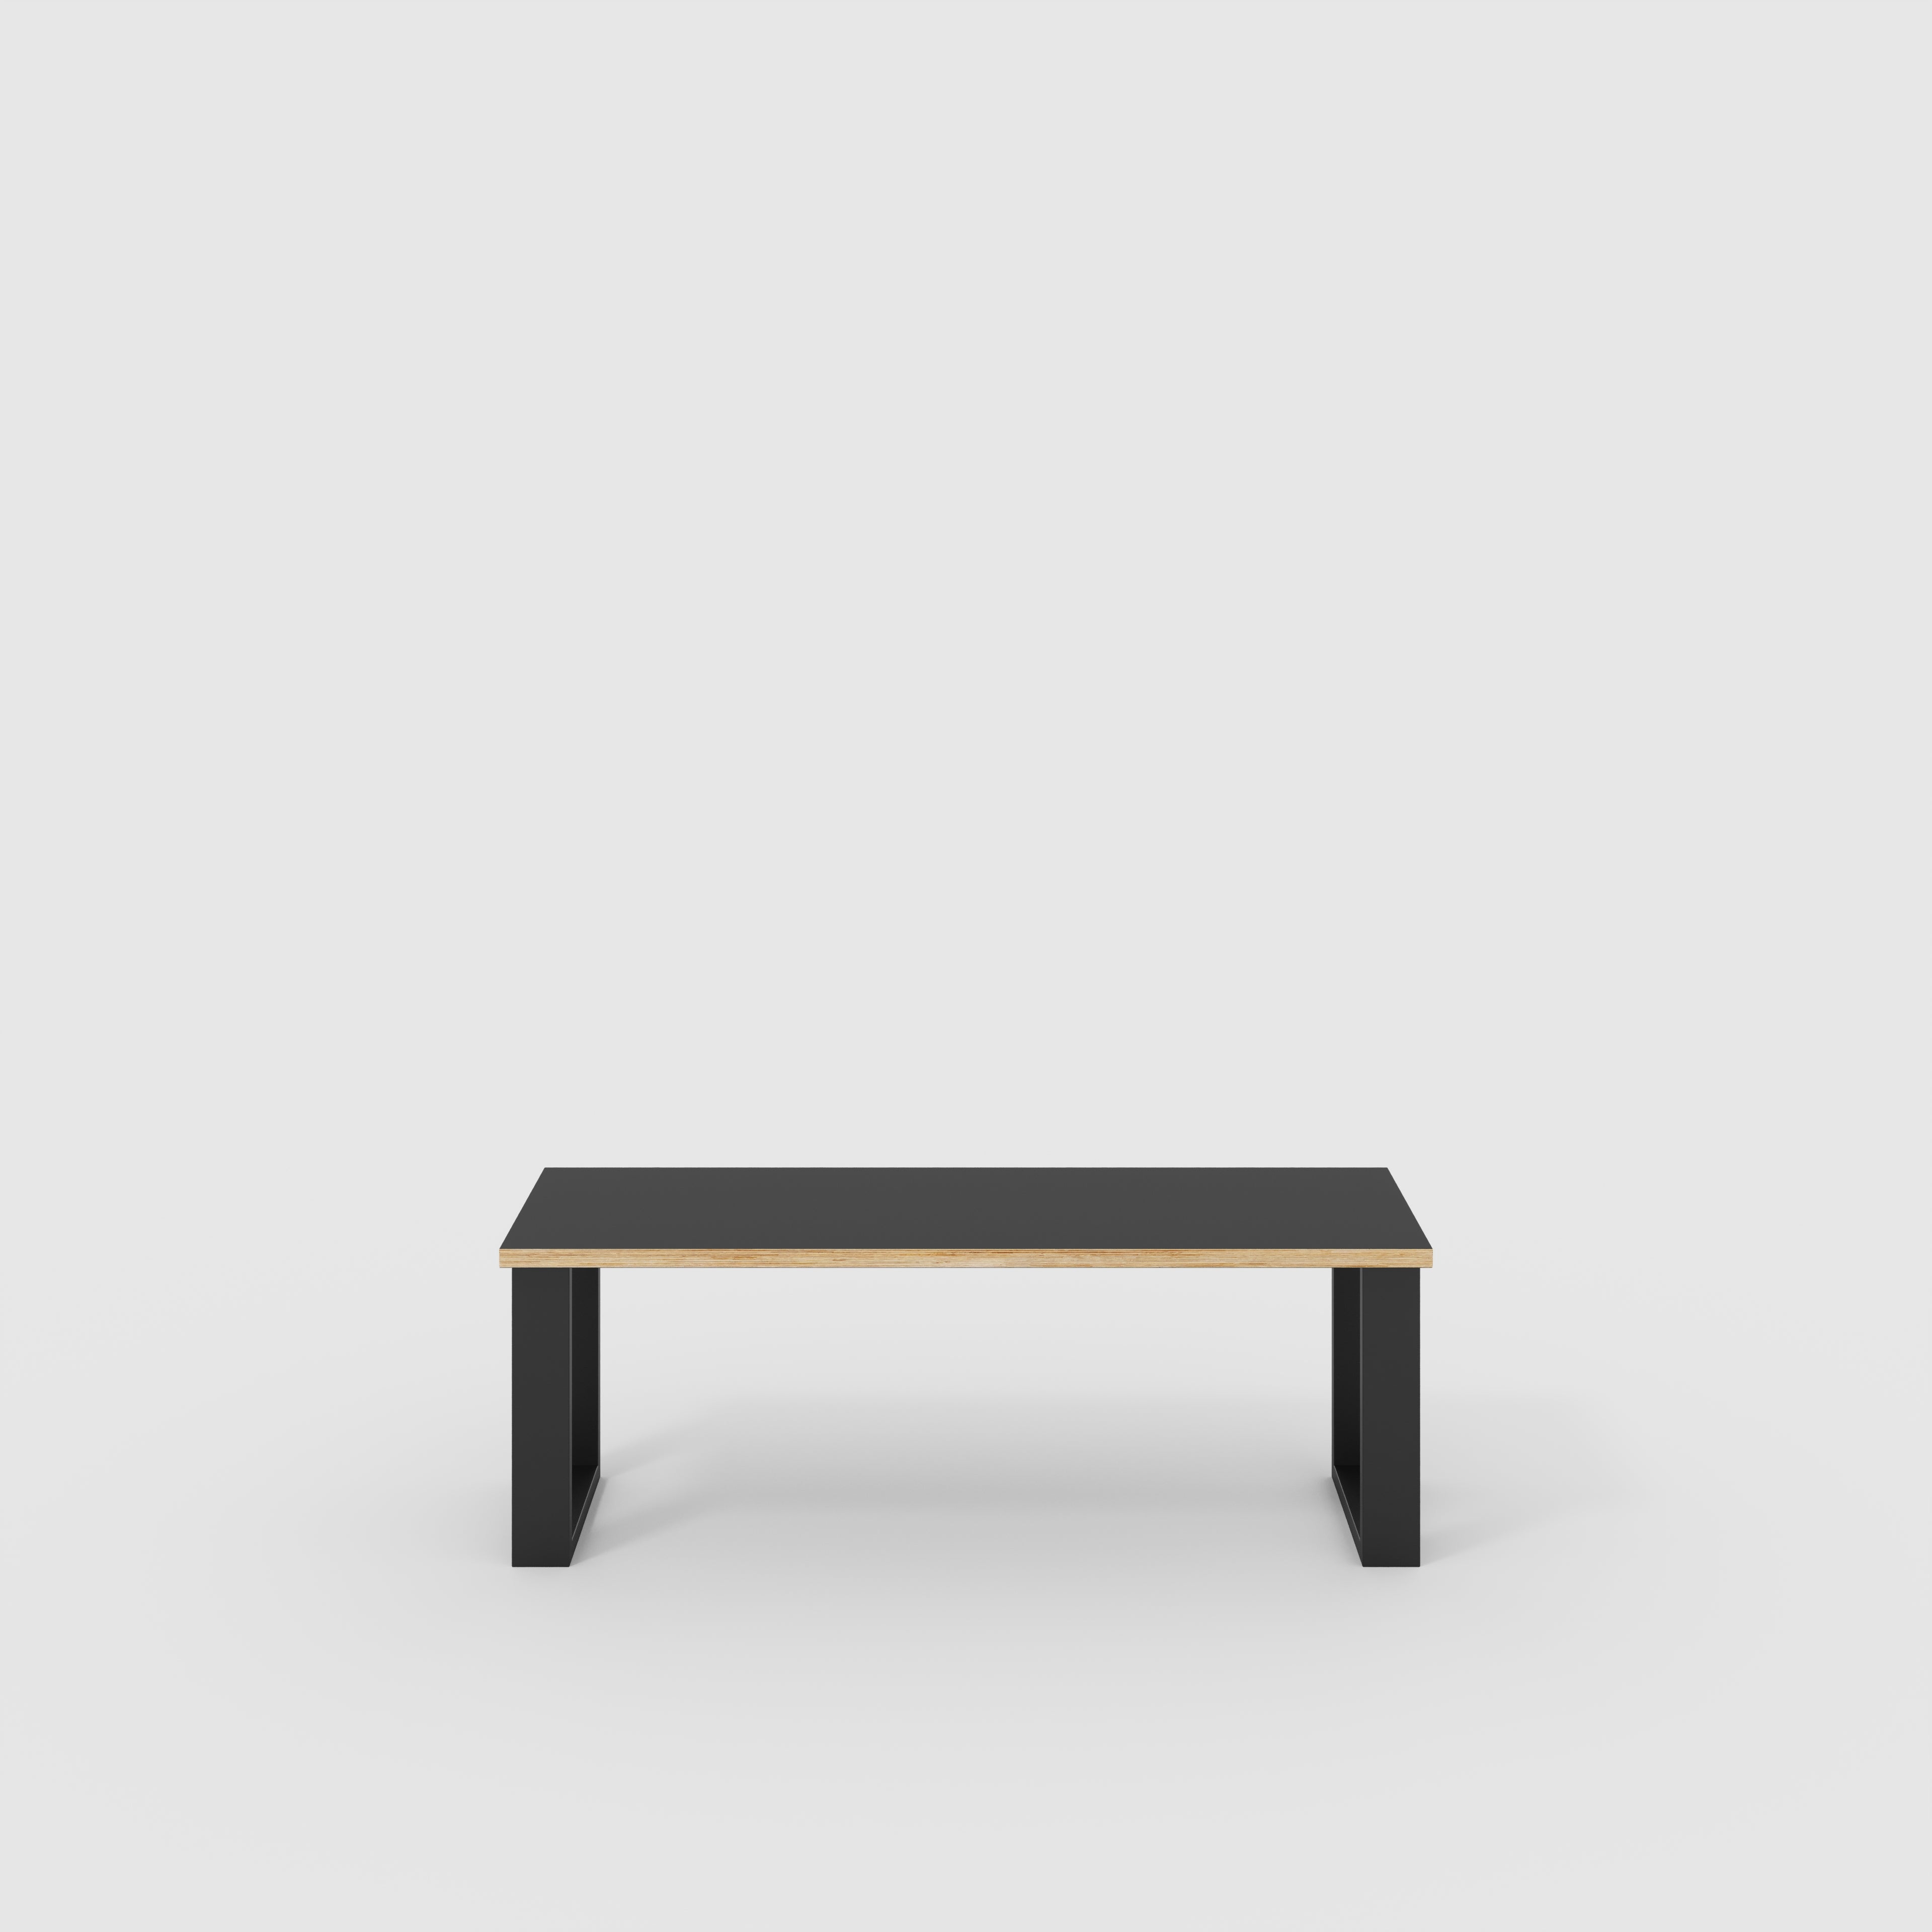 Bench Seat with Black Industrial Legs - Formica Diamond Black - 1200(w) x 400(d)